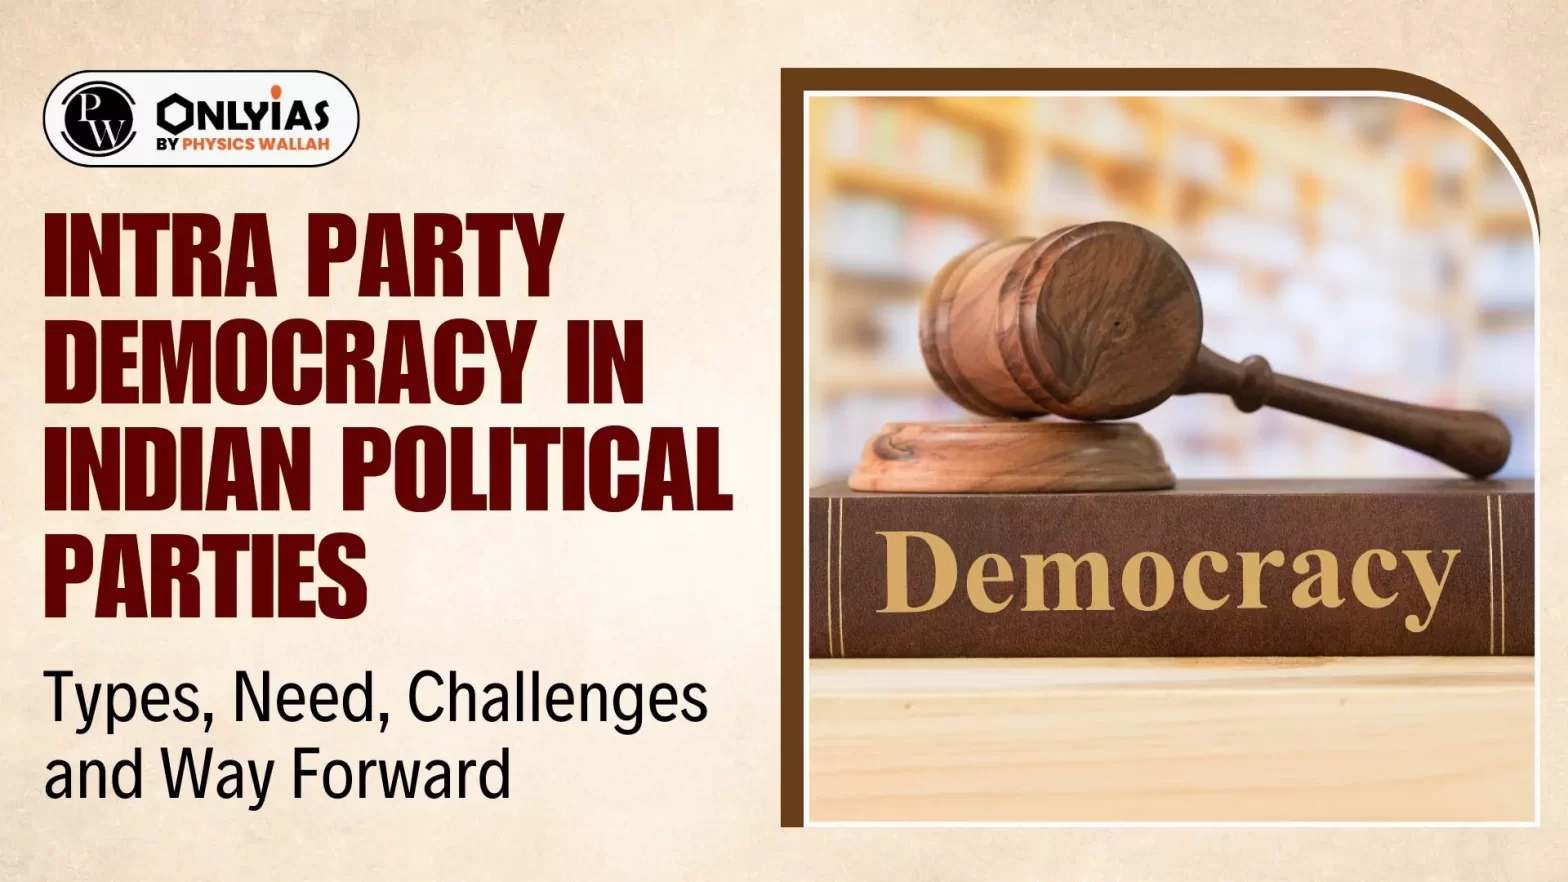 Intra Party Democracy in Indian Political Parties: Types, Need, Challenges and Way Forward